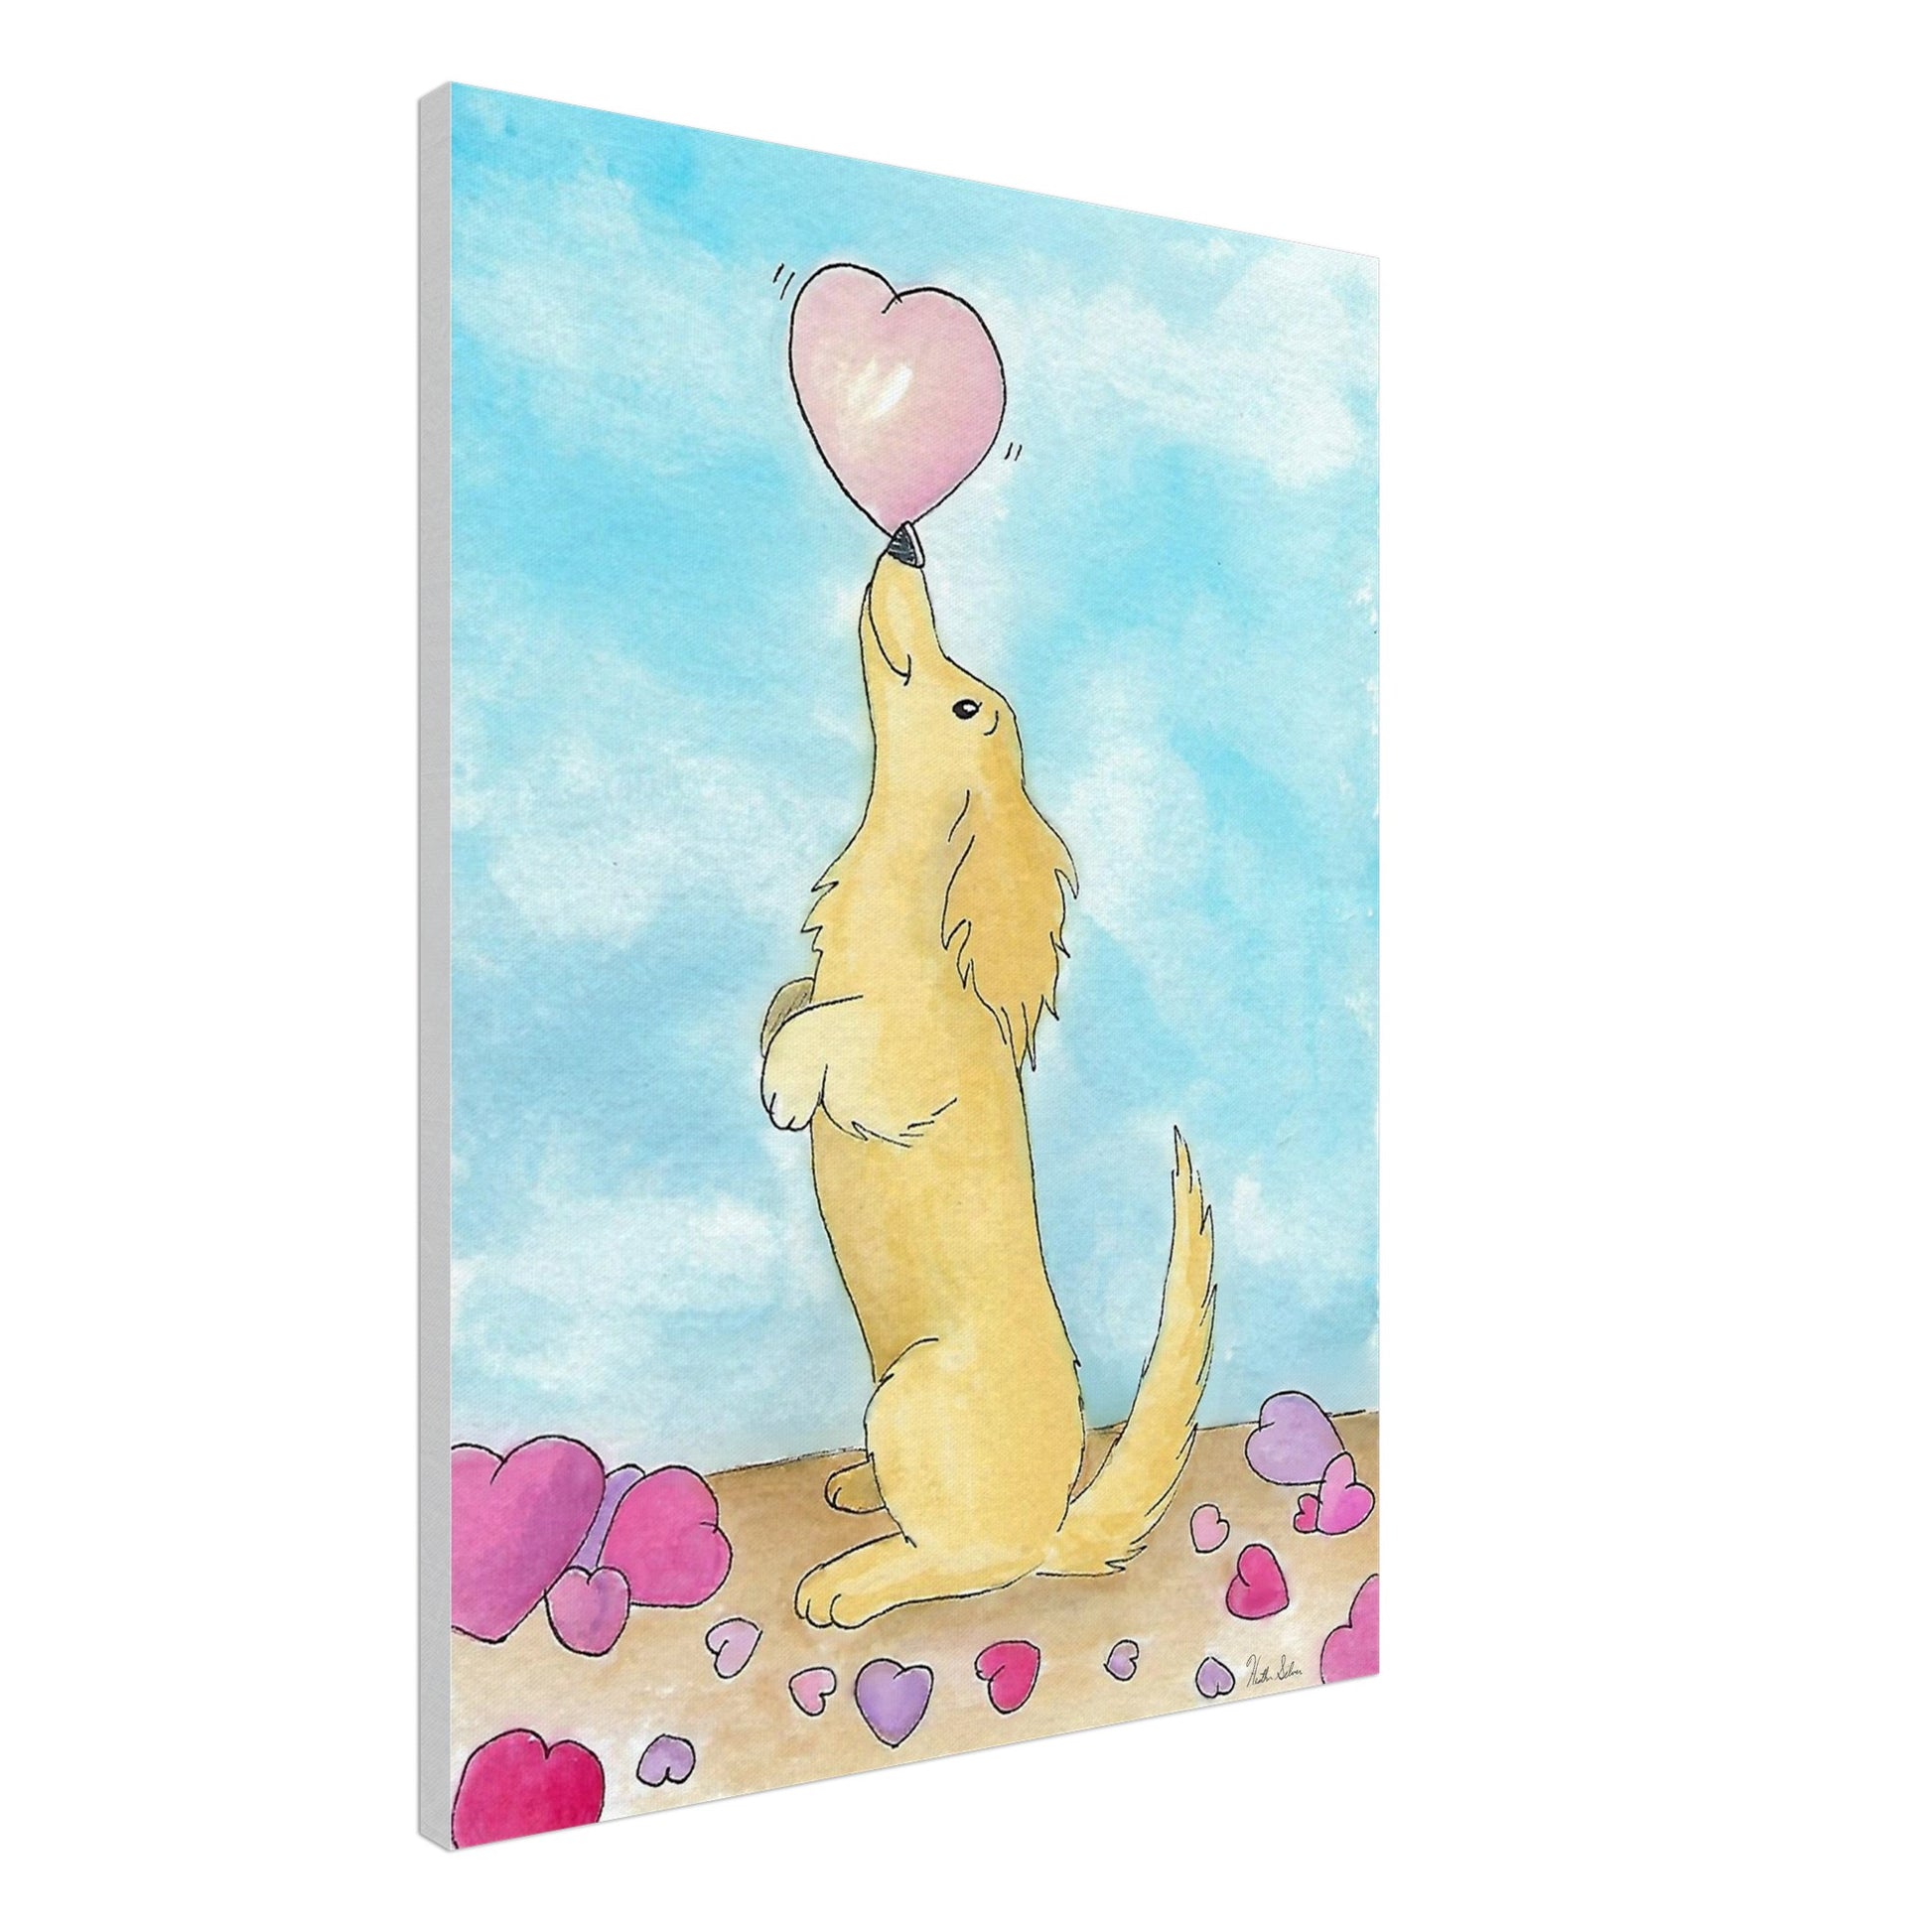 24 by 32 inch canvas wall art print of Heather Silver's watercolor painting, Puppy Love. It features a cute dog balancing a pink heart on its nose against a blue sky background. Canvas shown at an angle.